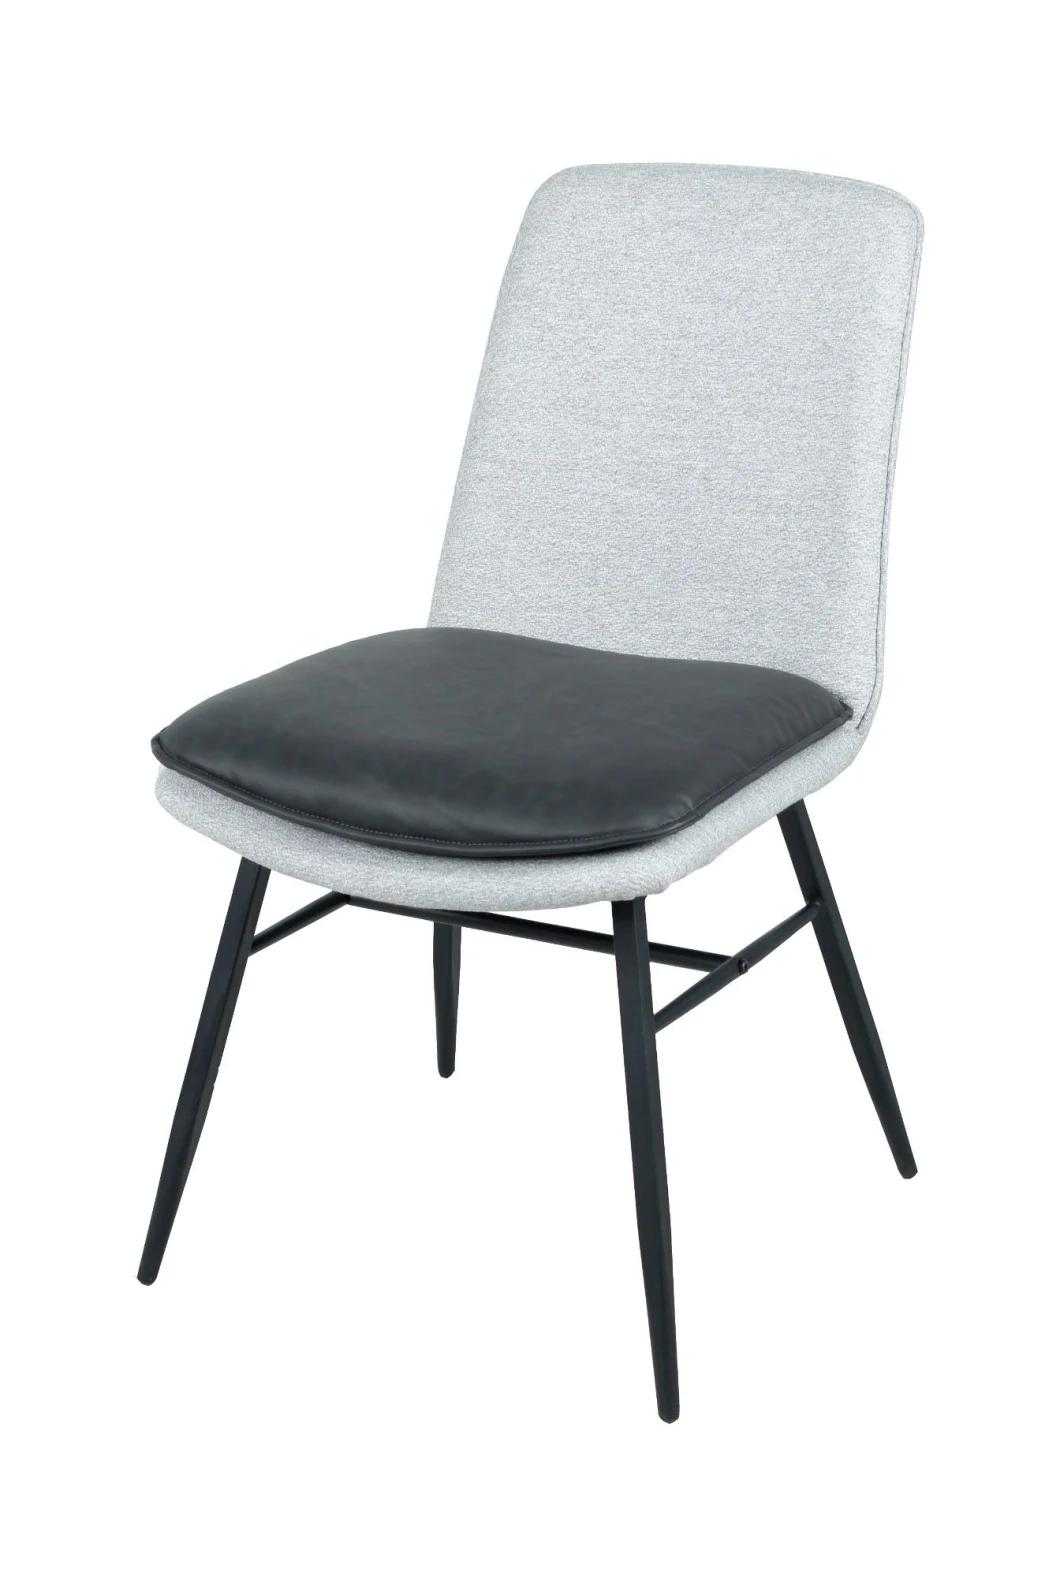 Modern Hot Sale Simple Design Hotel Restaurant Cafe Furniture Fabric PU Leather Dining Chair